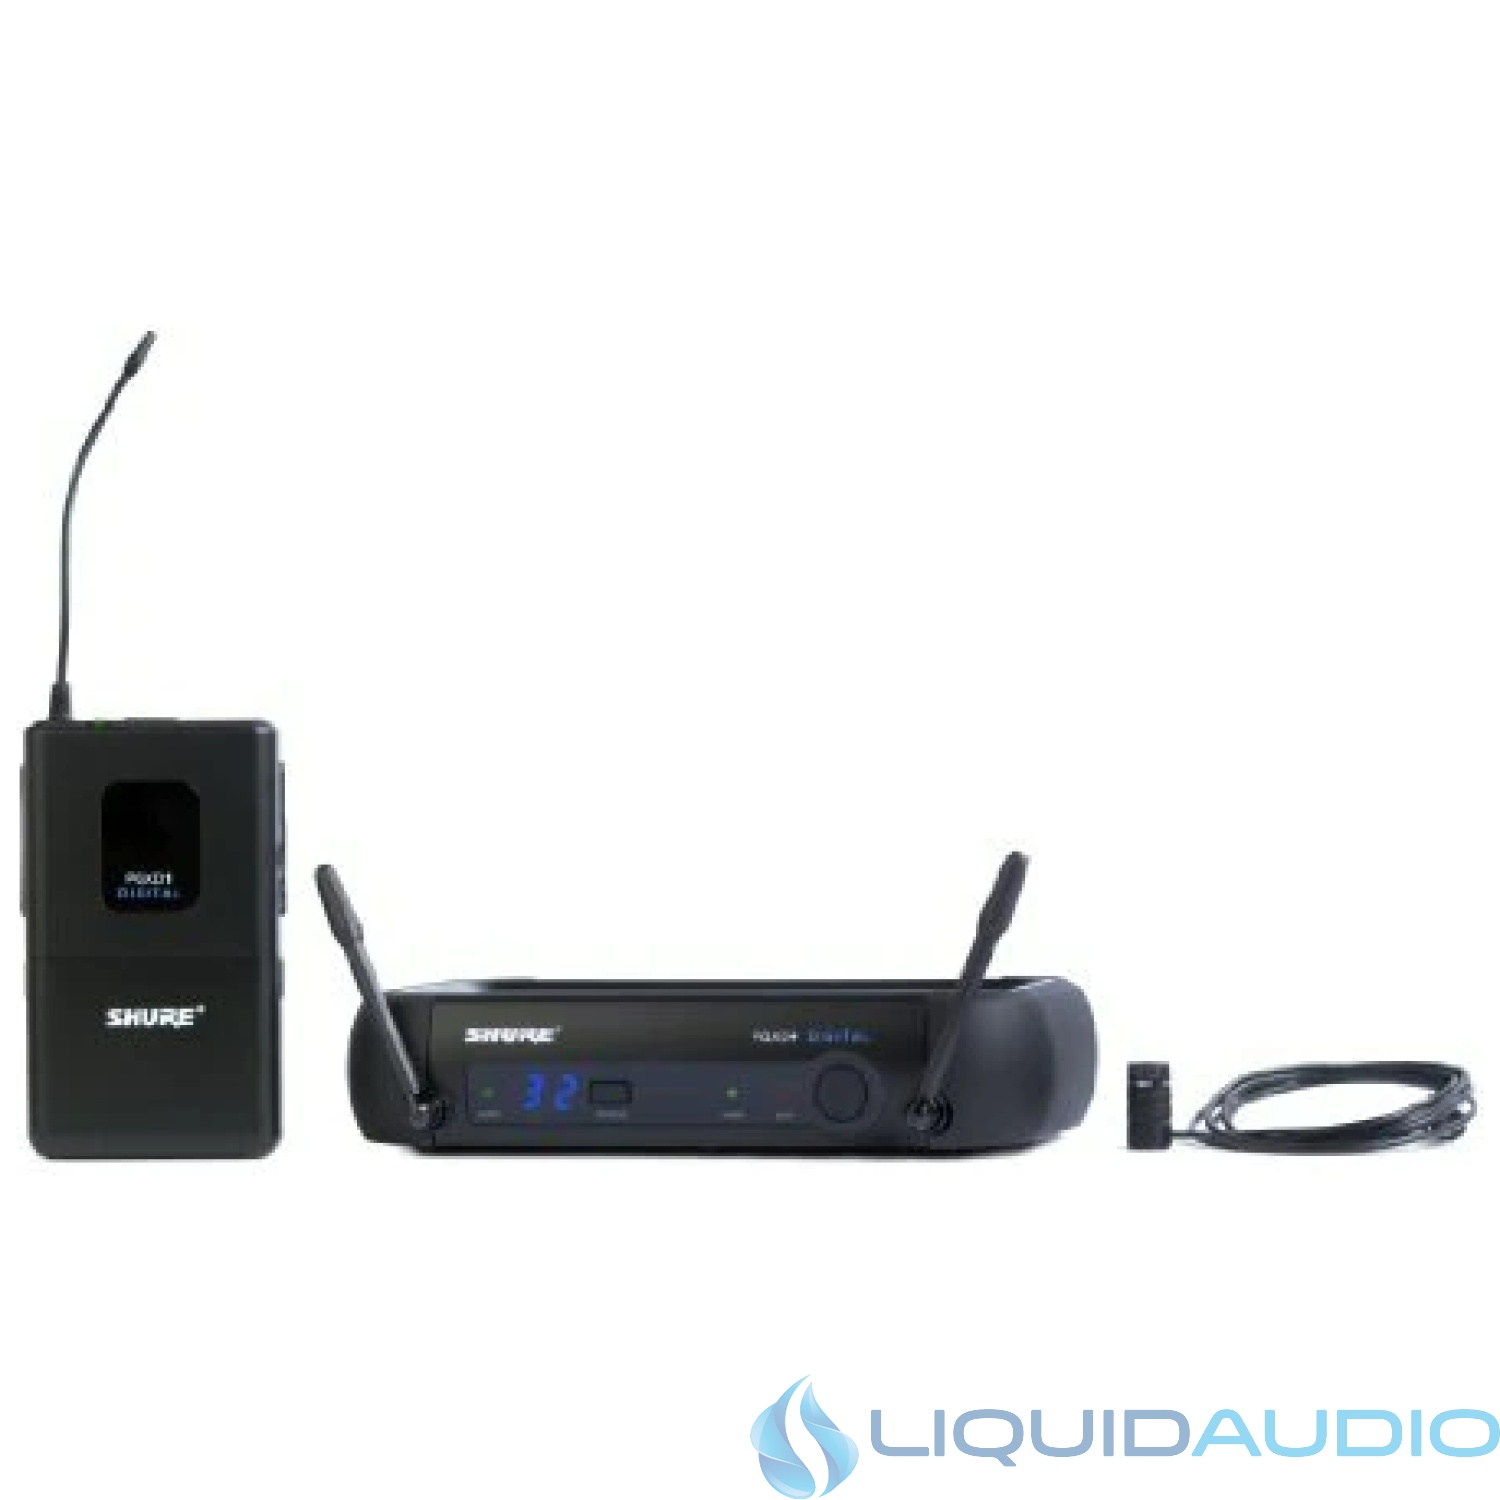 Shure PGXD14/85-X8 Digital Lavalier Wireless System with WL185 Lavalier Microphone